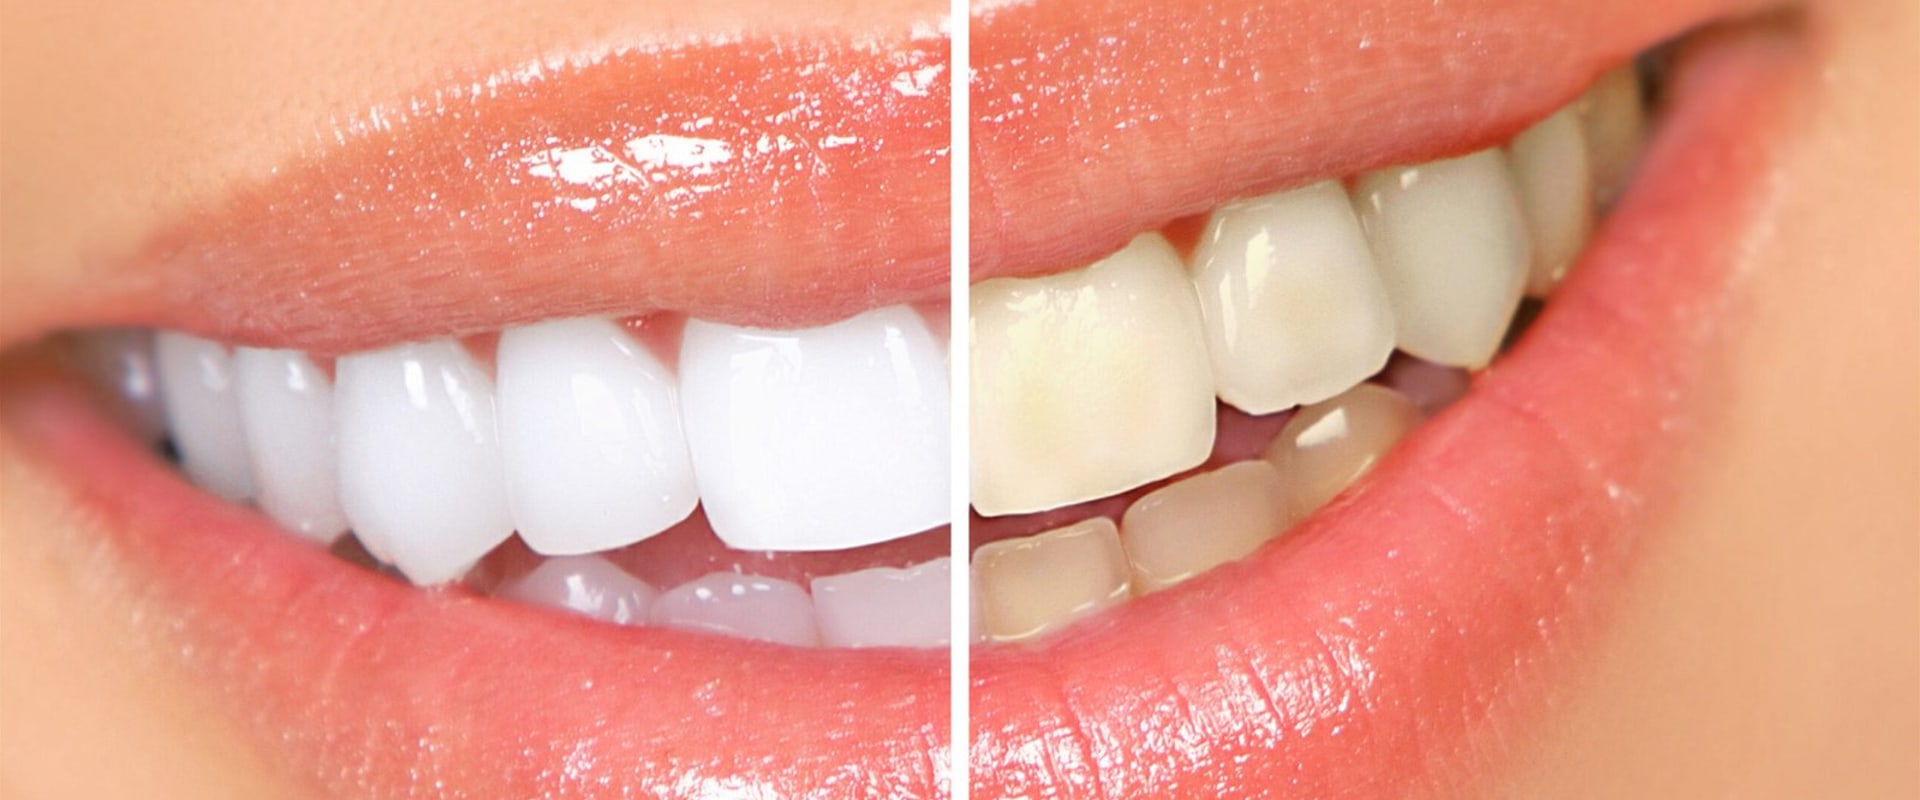 Pros and Cons of Whitening Toothpastes